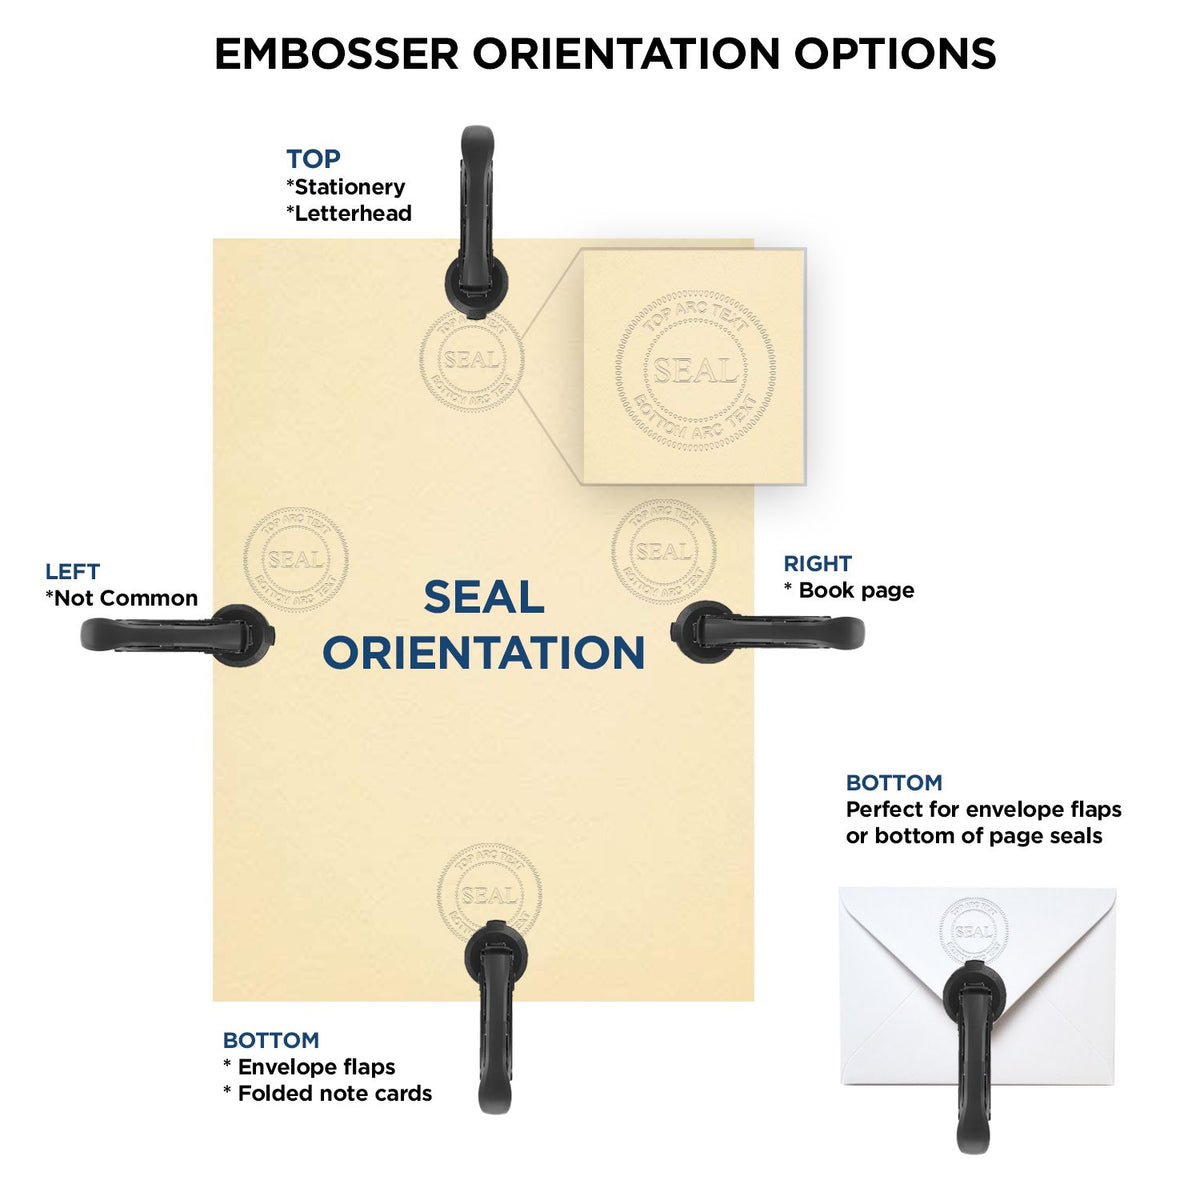 An infographic for the Gift Ohio Land Surveyor Seal showing embosser orientation, this is showing examples of a top, bottom, right and left insert.